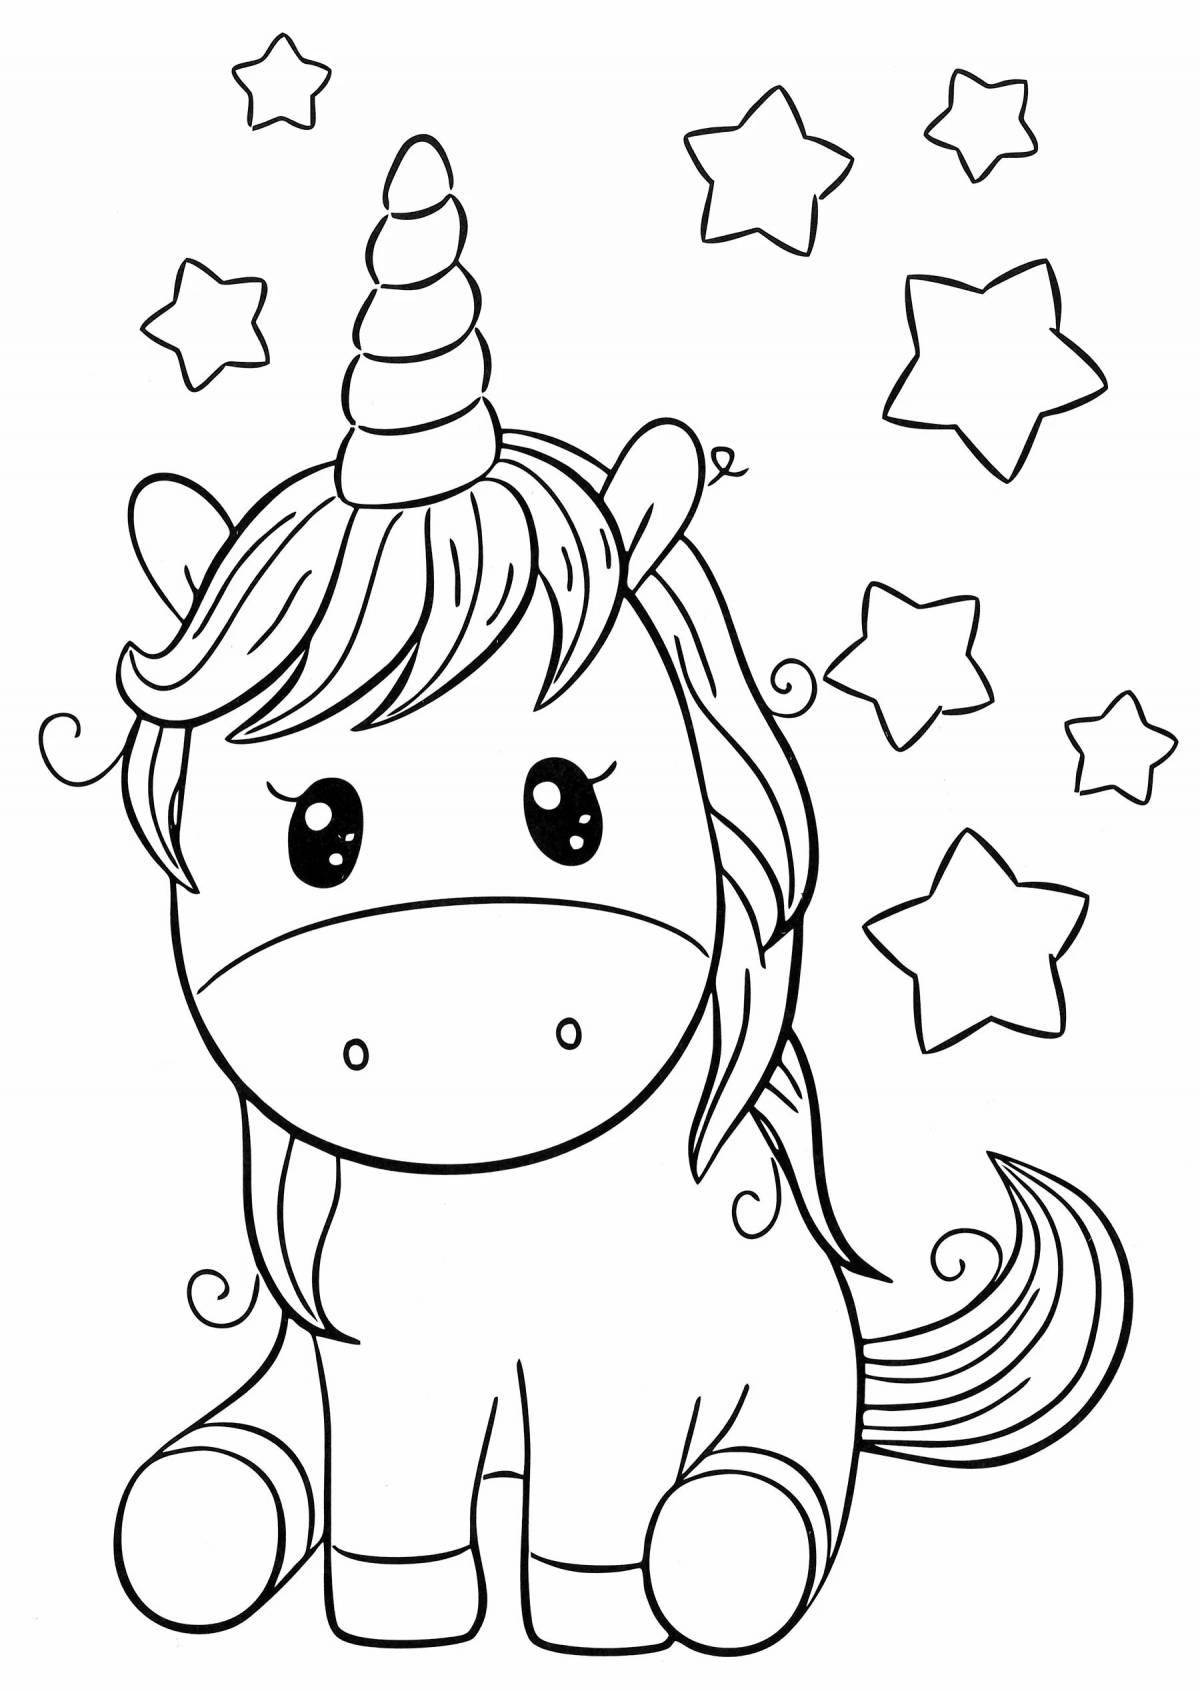 Unicorn drawing for kids #6